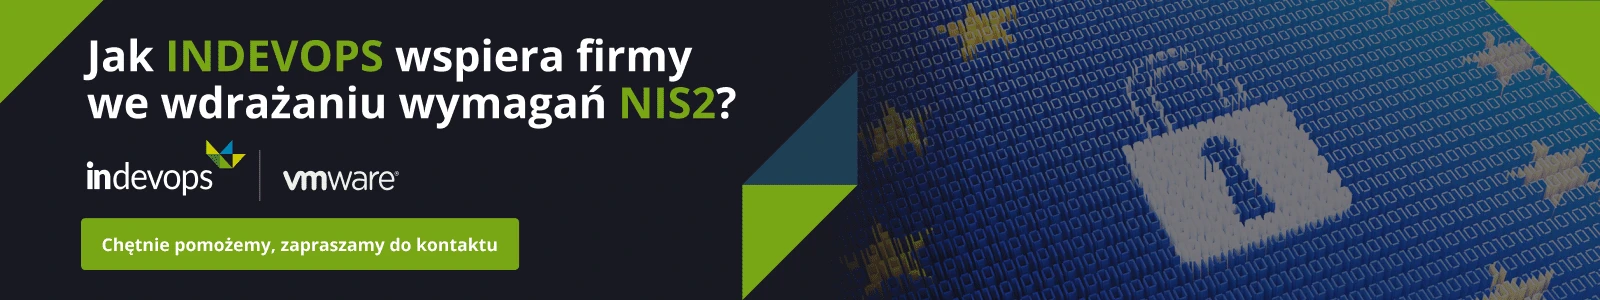 How does INDEVOPS support companies in implementing NIS2 requirements?